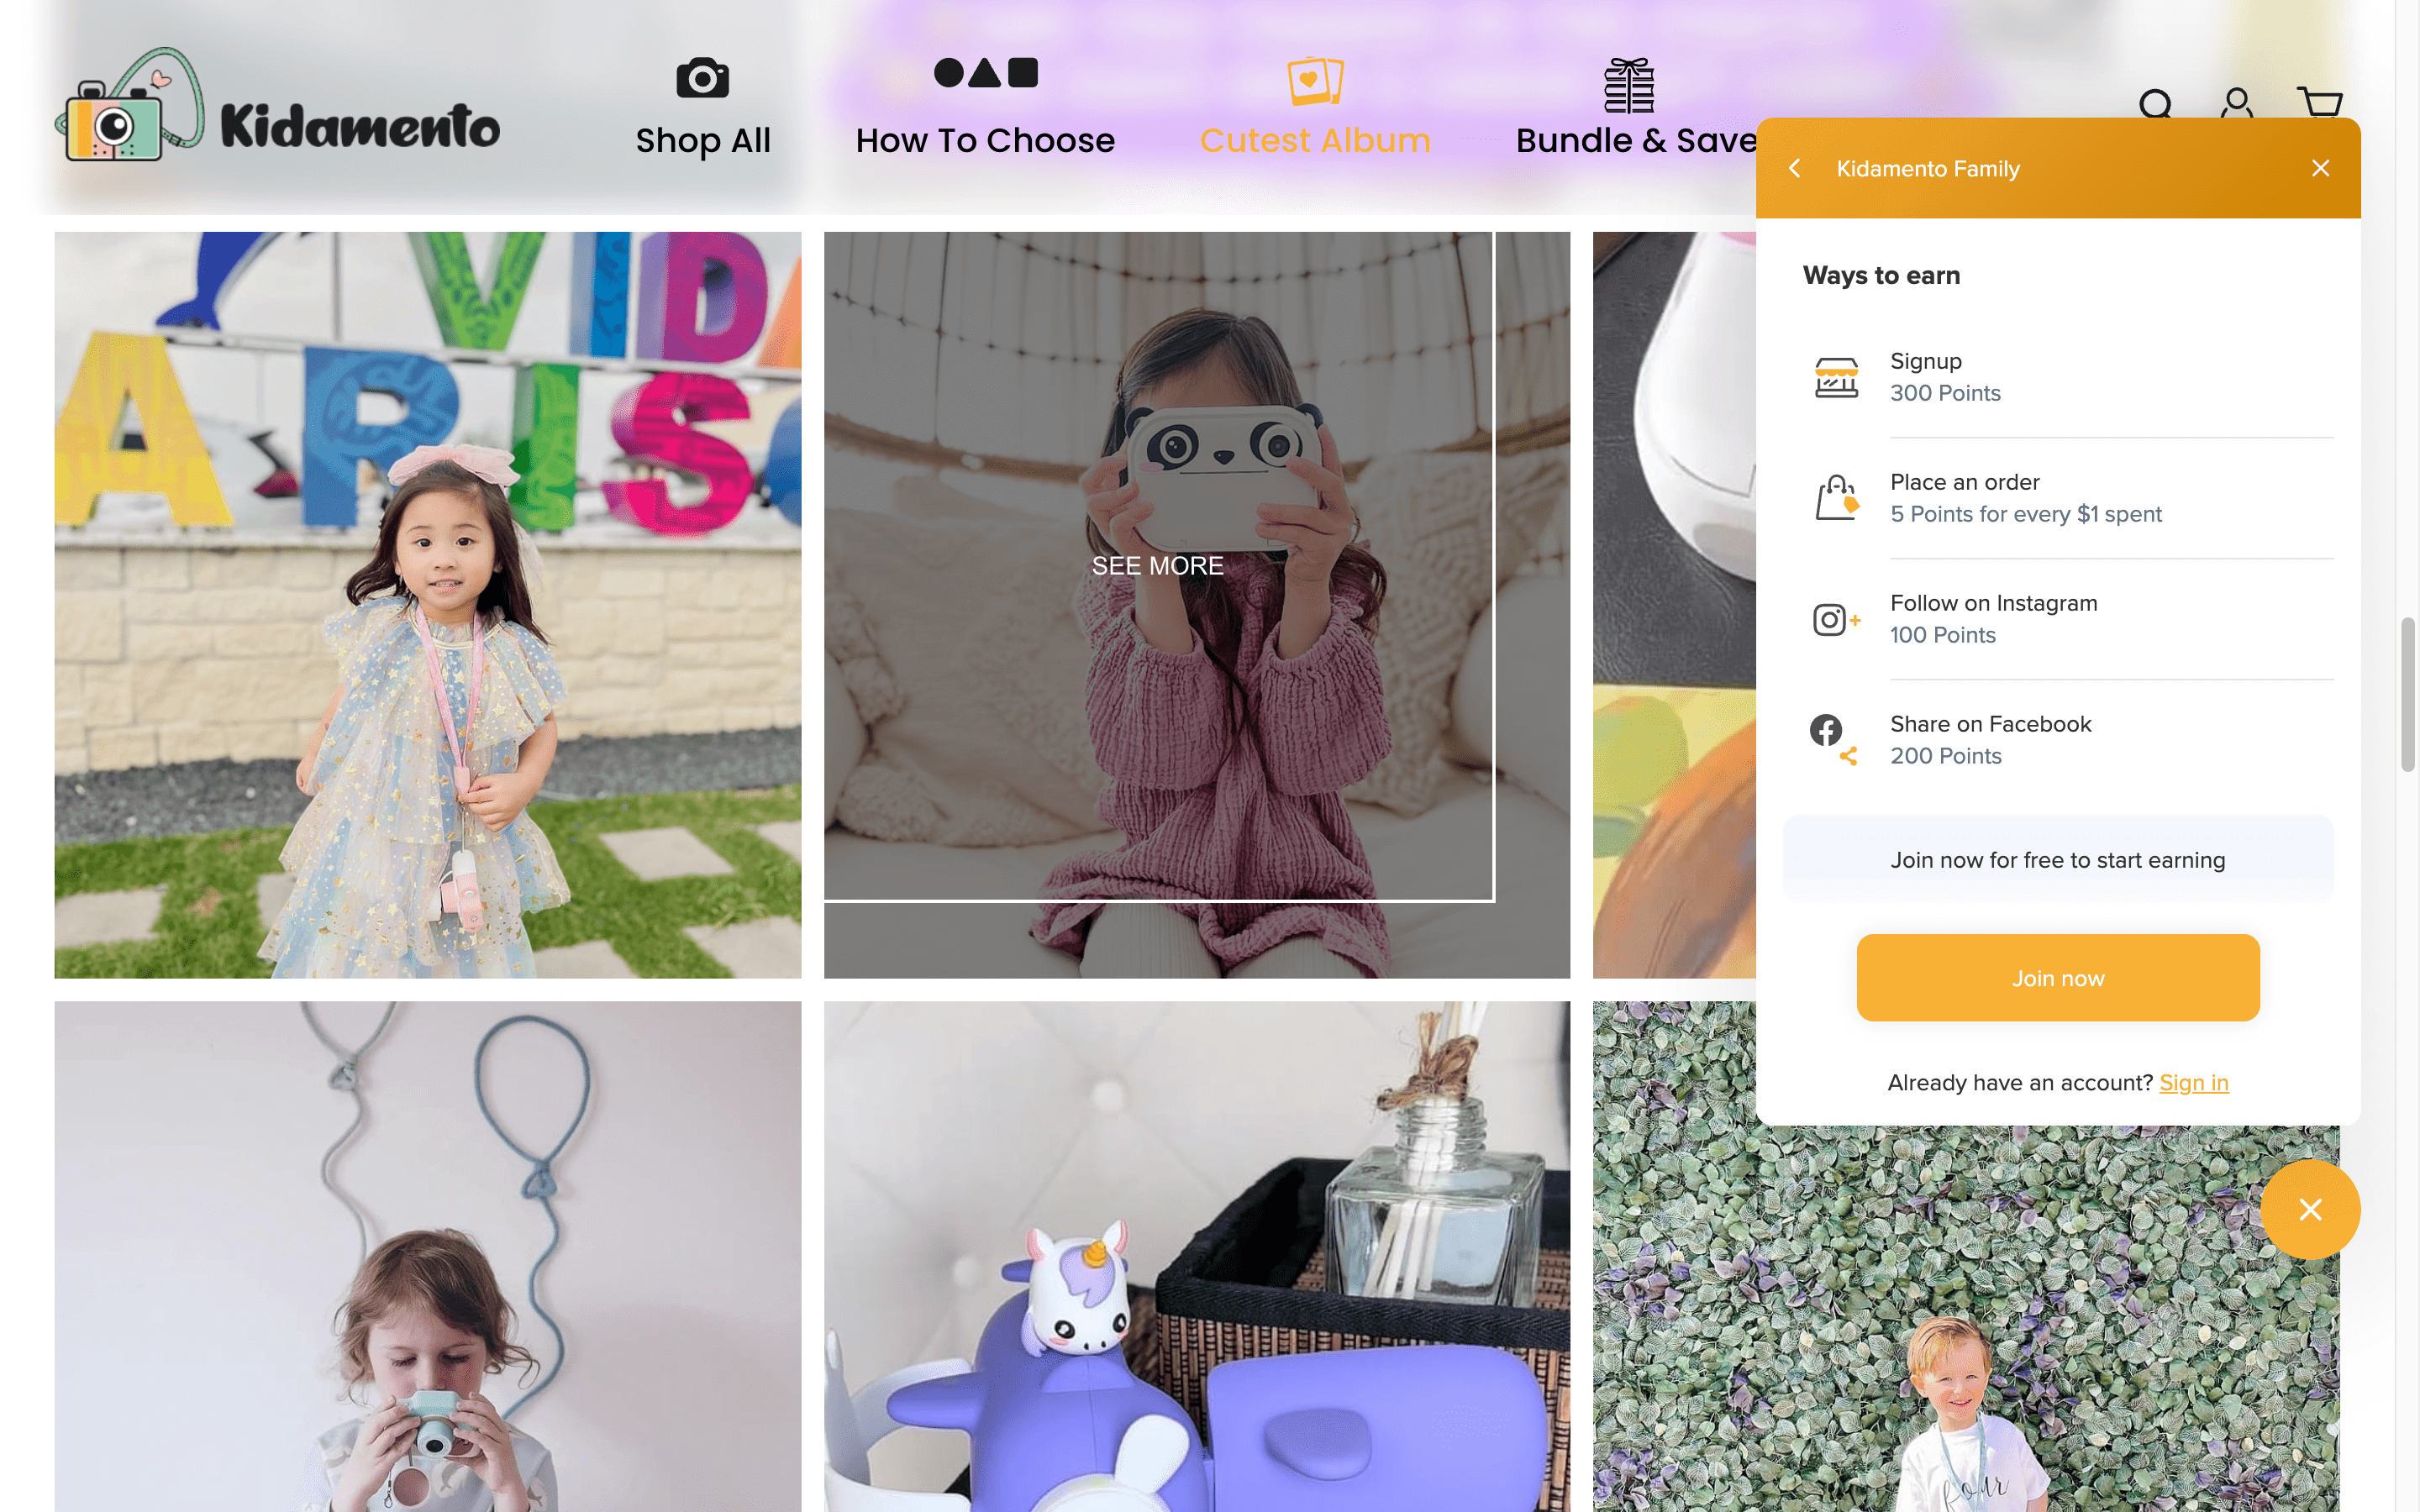 A screenshot of a page on Kidamento’s website called Cutest Album. It shows a tiled gallery layout of photos of children using its cameras. On the right side of the page is the loyalty program panel showing ways to earn: signup, place an order, follow on Instagram, and share on Facebook. 